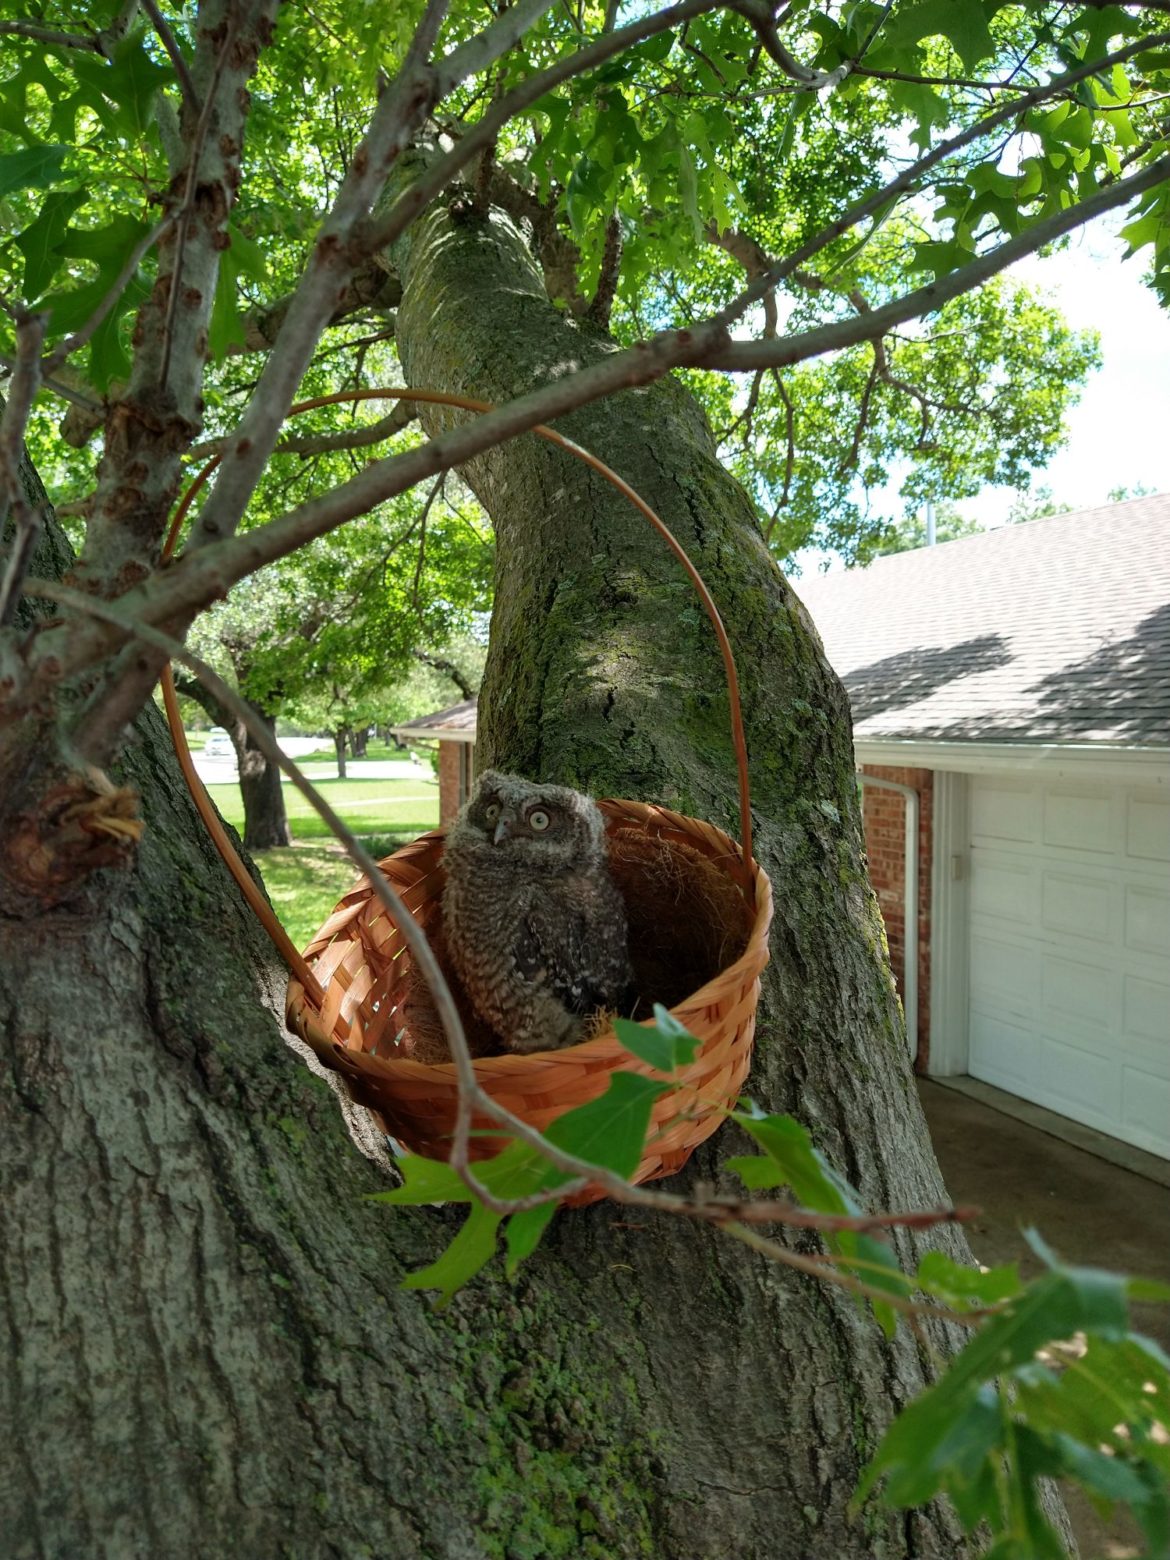 Baby Owl in a Basket